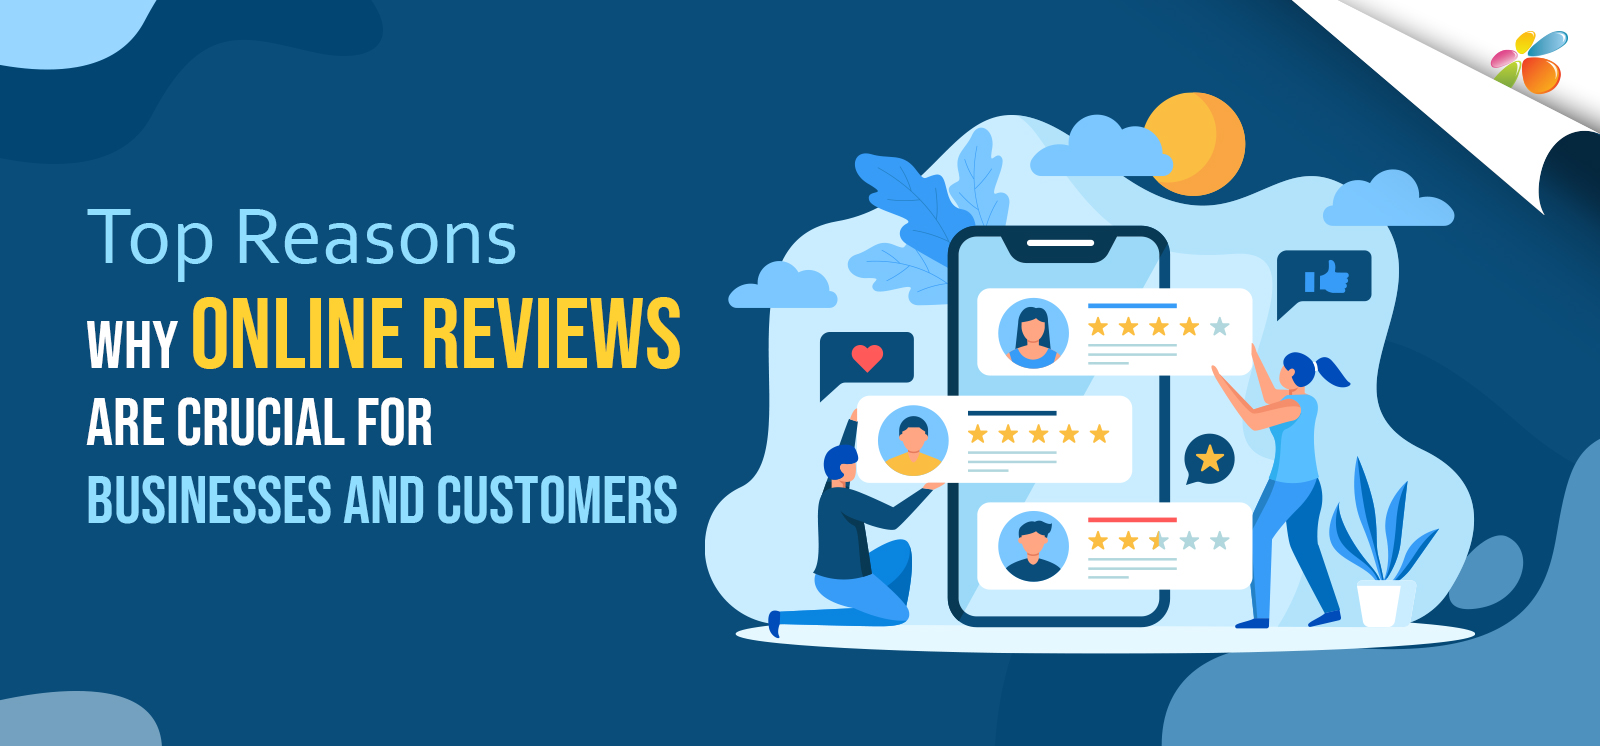 Top Reasons Why Online Reviews are Crucial for Businesses and Customers